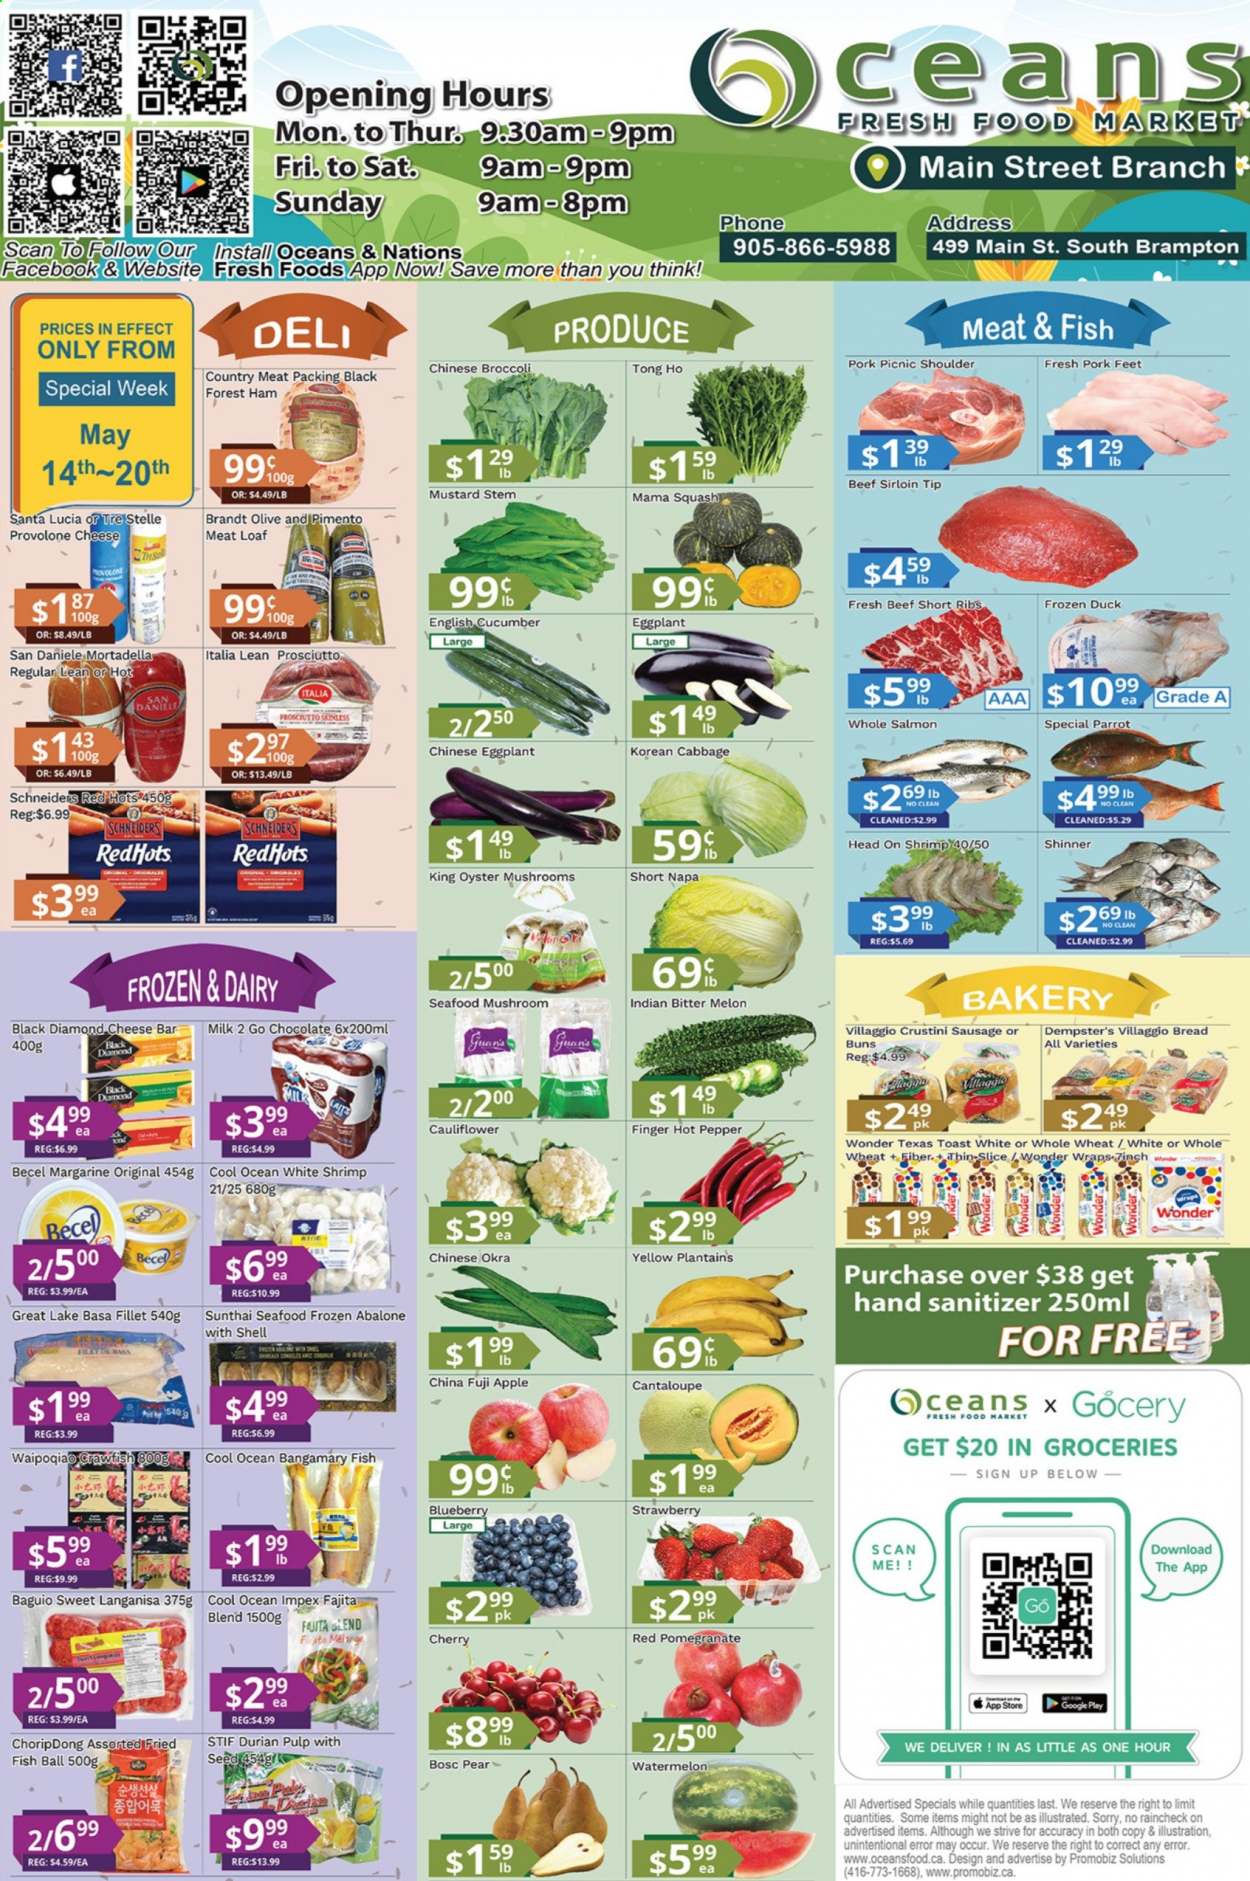 thumbnail - Oceans Flyer - May 14, 2021 - May 20, 2021 - Sales products - oyster mushrooms, mushrooms, bread, buns, wraps, broccoli, cantaloupe, okra, eggplant, watermelon, plantains, pears, Fuji apple, melons, pomegranate, salmon, oysters, seafood, shrimps, abalone, fried fish, fajita, mortadella, ham, prosciutto, sausage, cheese, Provolone, milk, margarine, chocolate, Santa, Fita, pepper, mustard, whole duck, beef meat, beef ribs, beef sirloin, pork meat, hand sanitizer, chinese broccoli. Page 1.